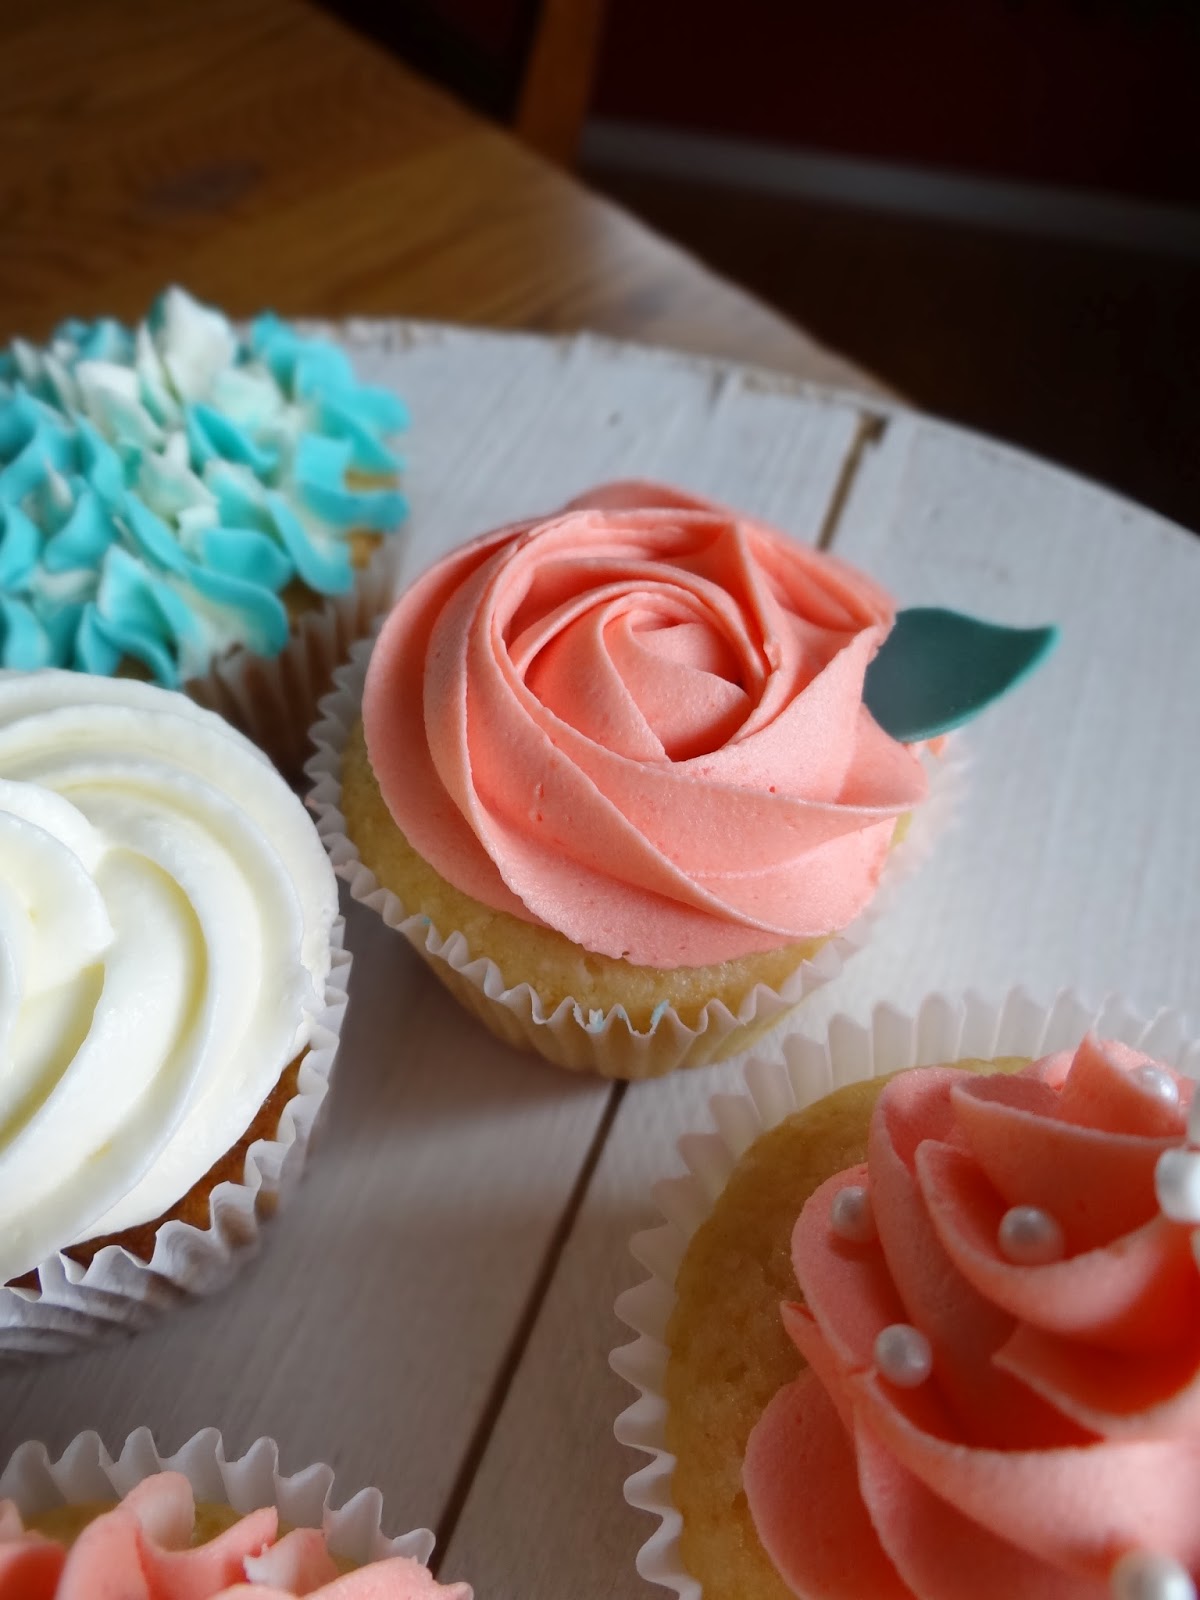 Teal and Coral Wedding Cupcakes